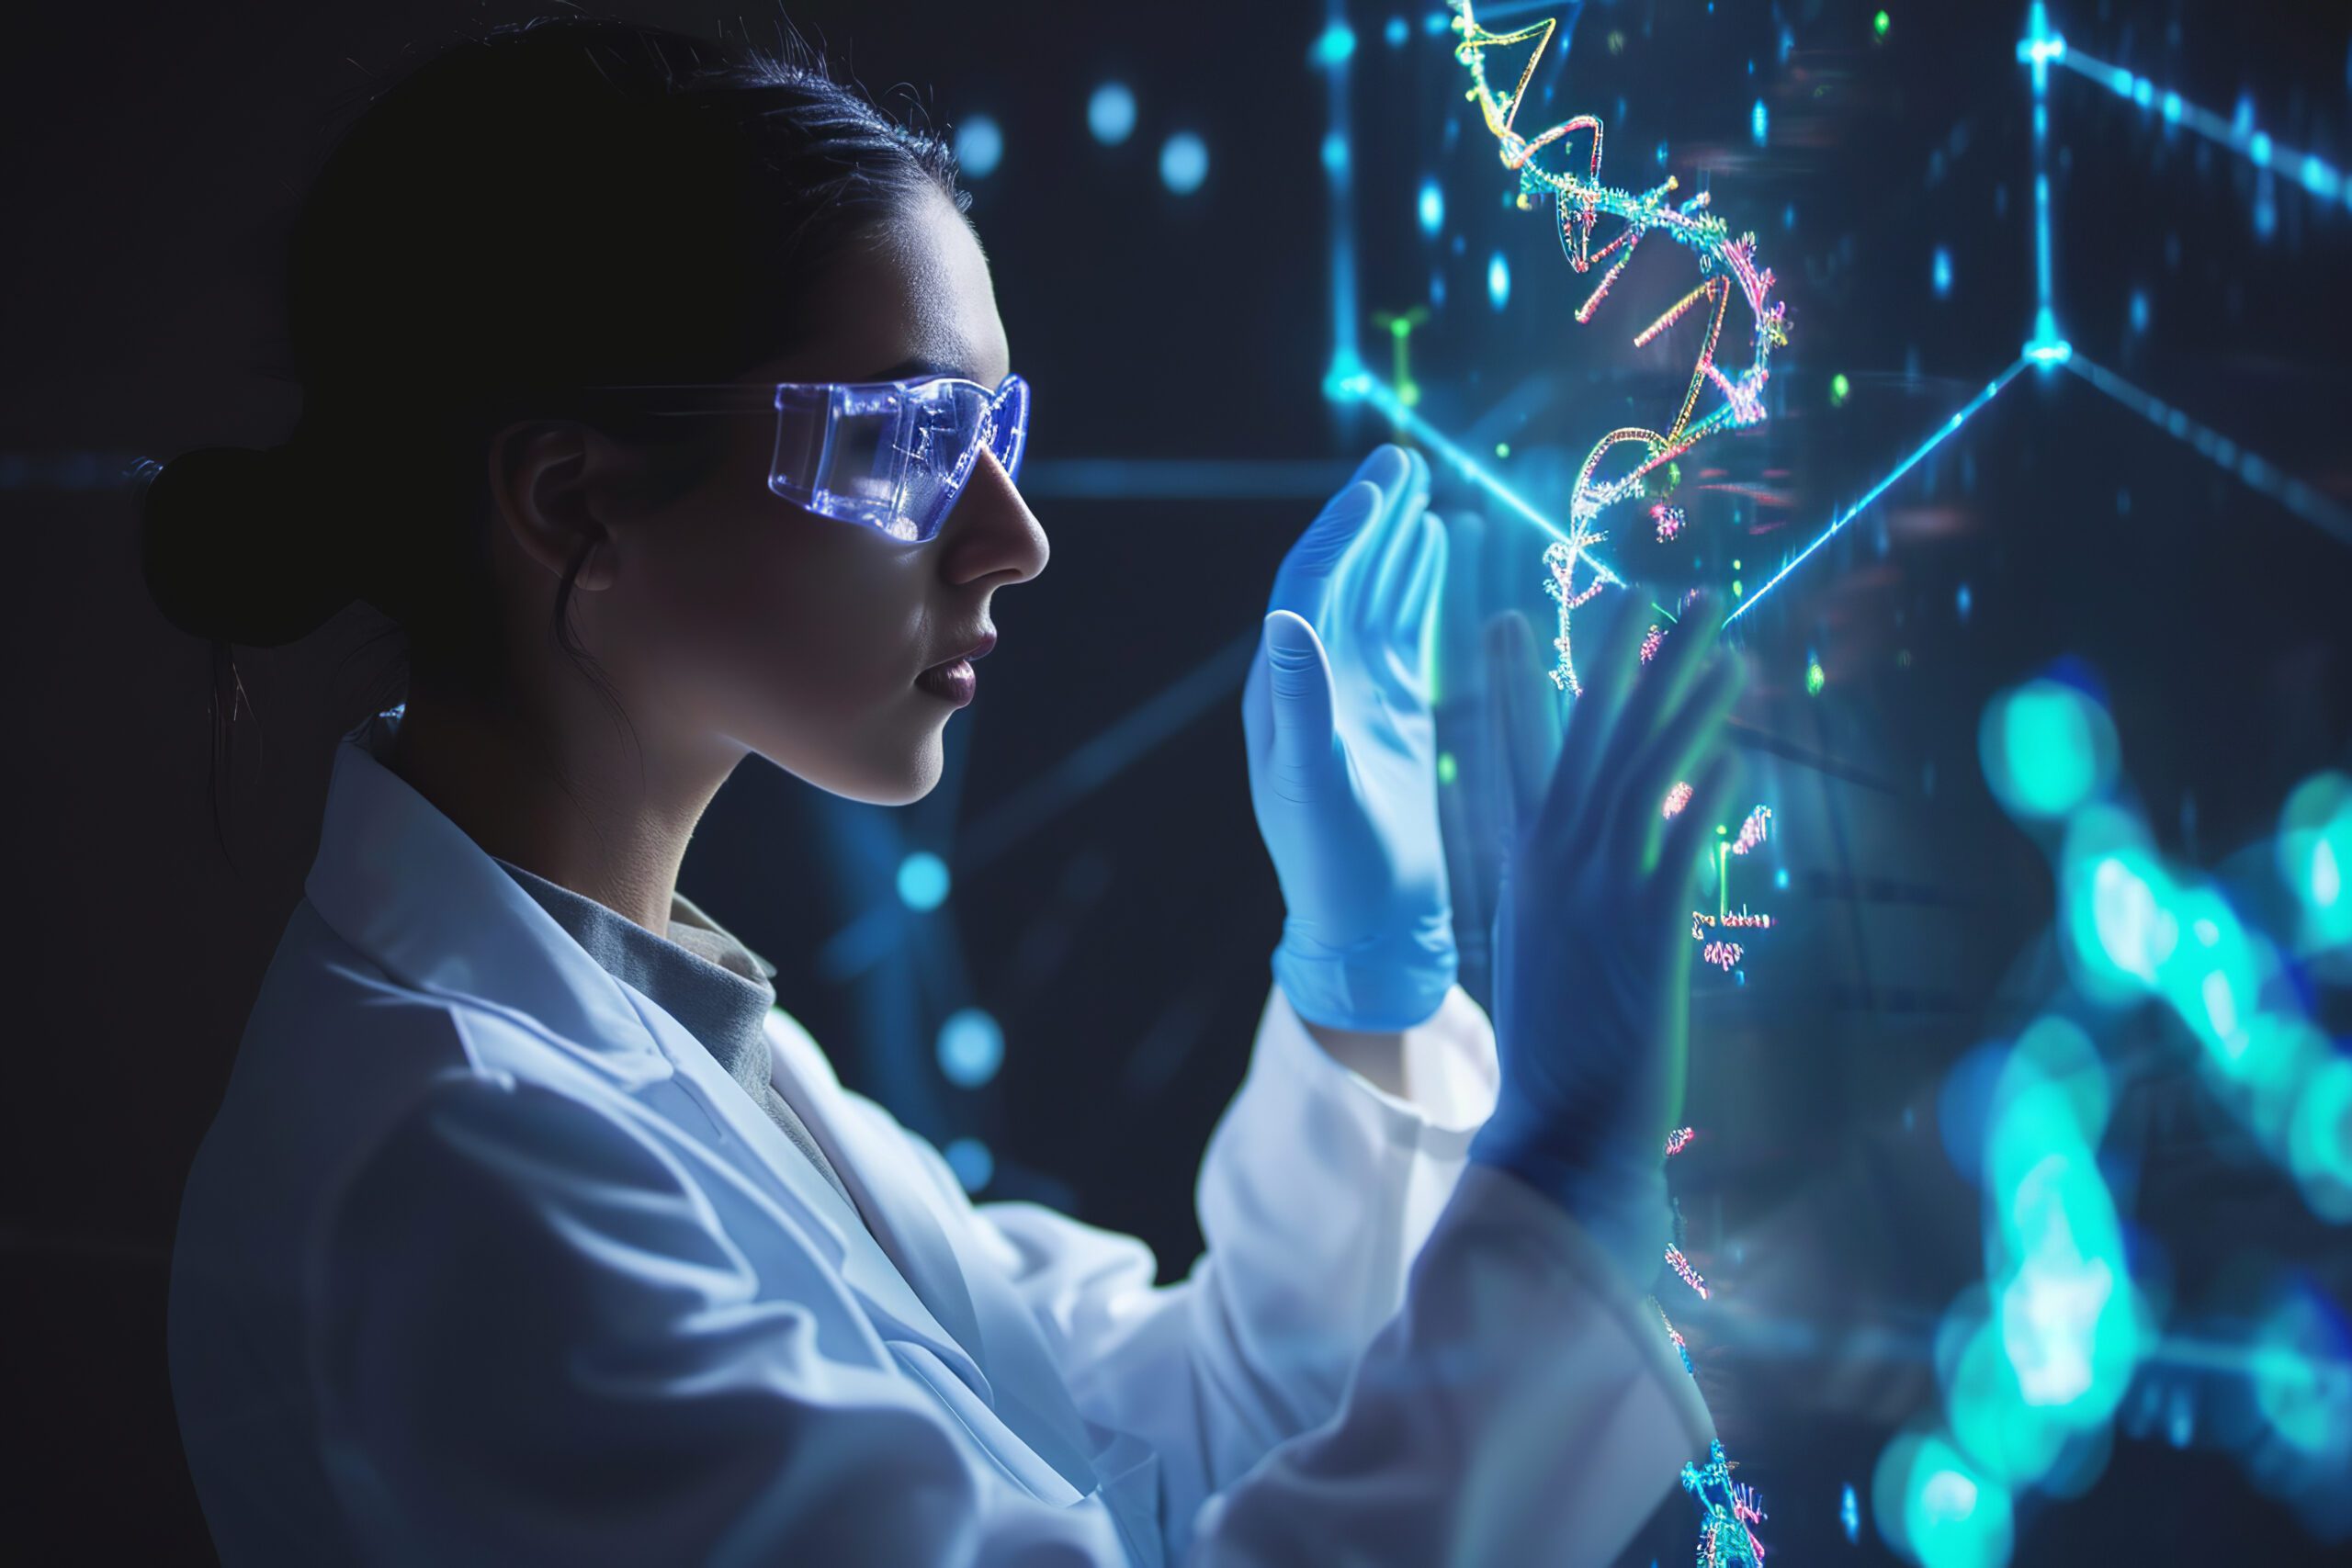 female scientist works on dna and a molecular genetic instrument, demonstrates a holographic presentation of modern biotechnology, innovation, medicine, science